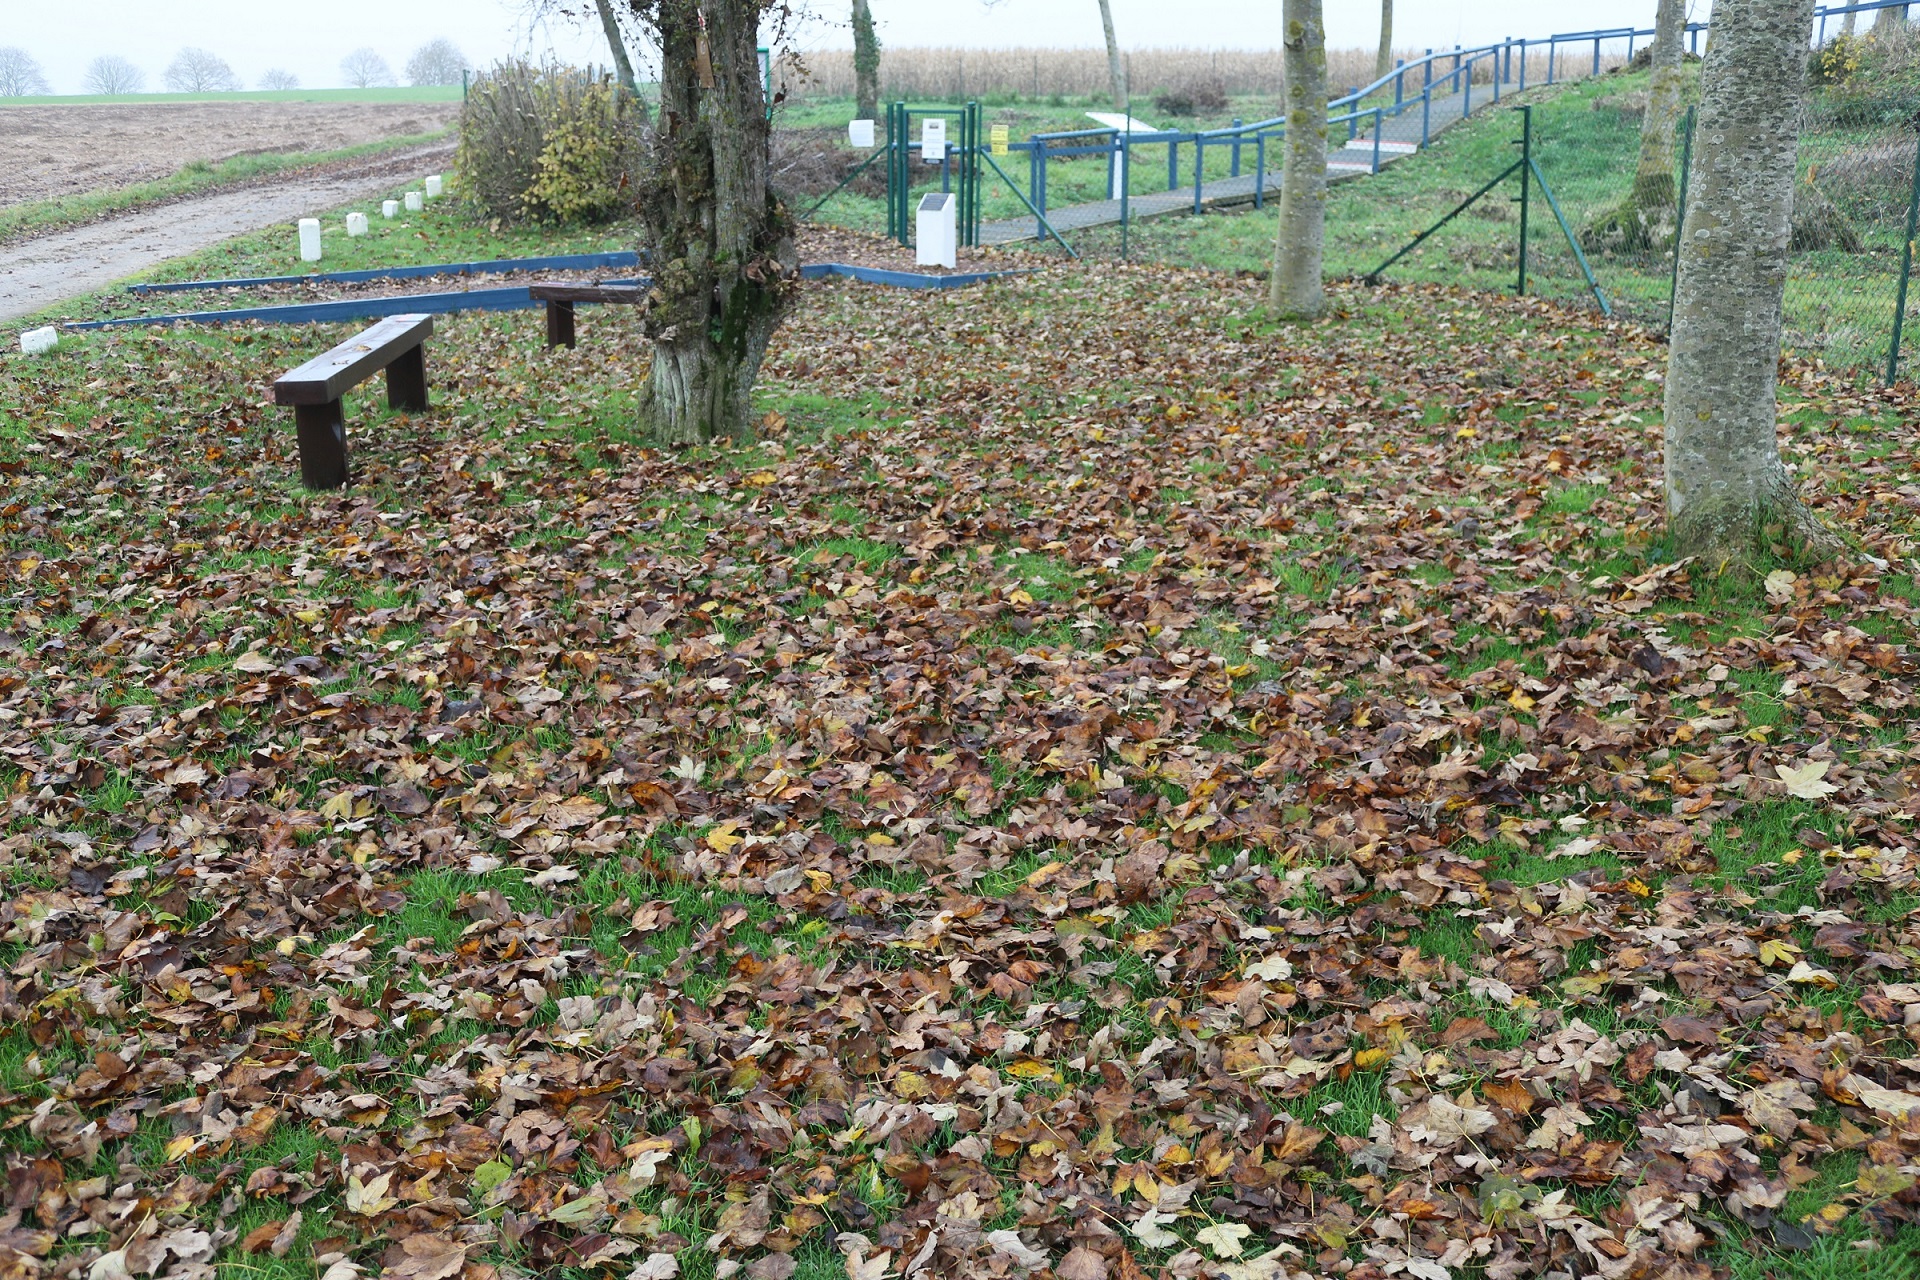 The grass at the car park area is covered in leaves. Winter is here.